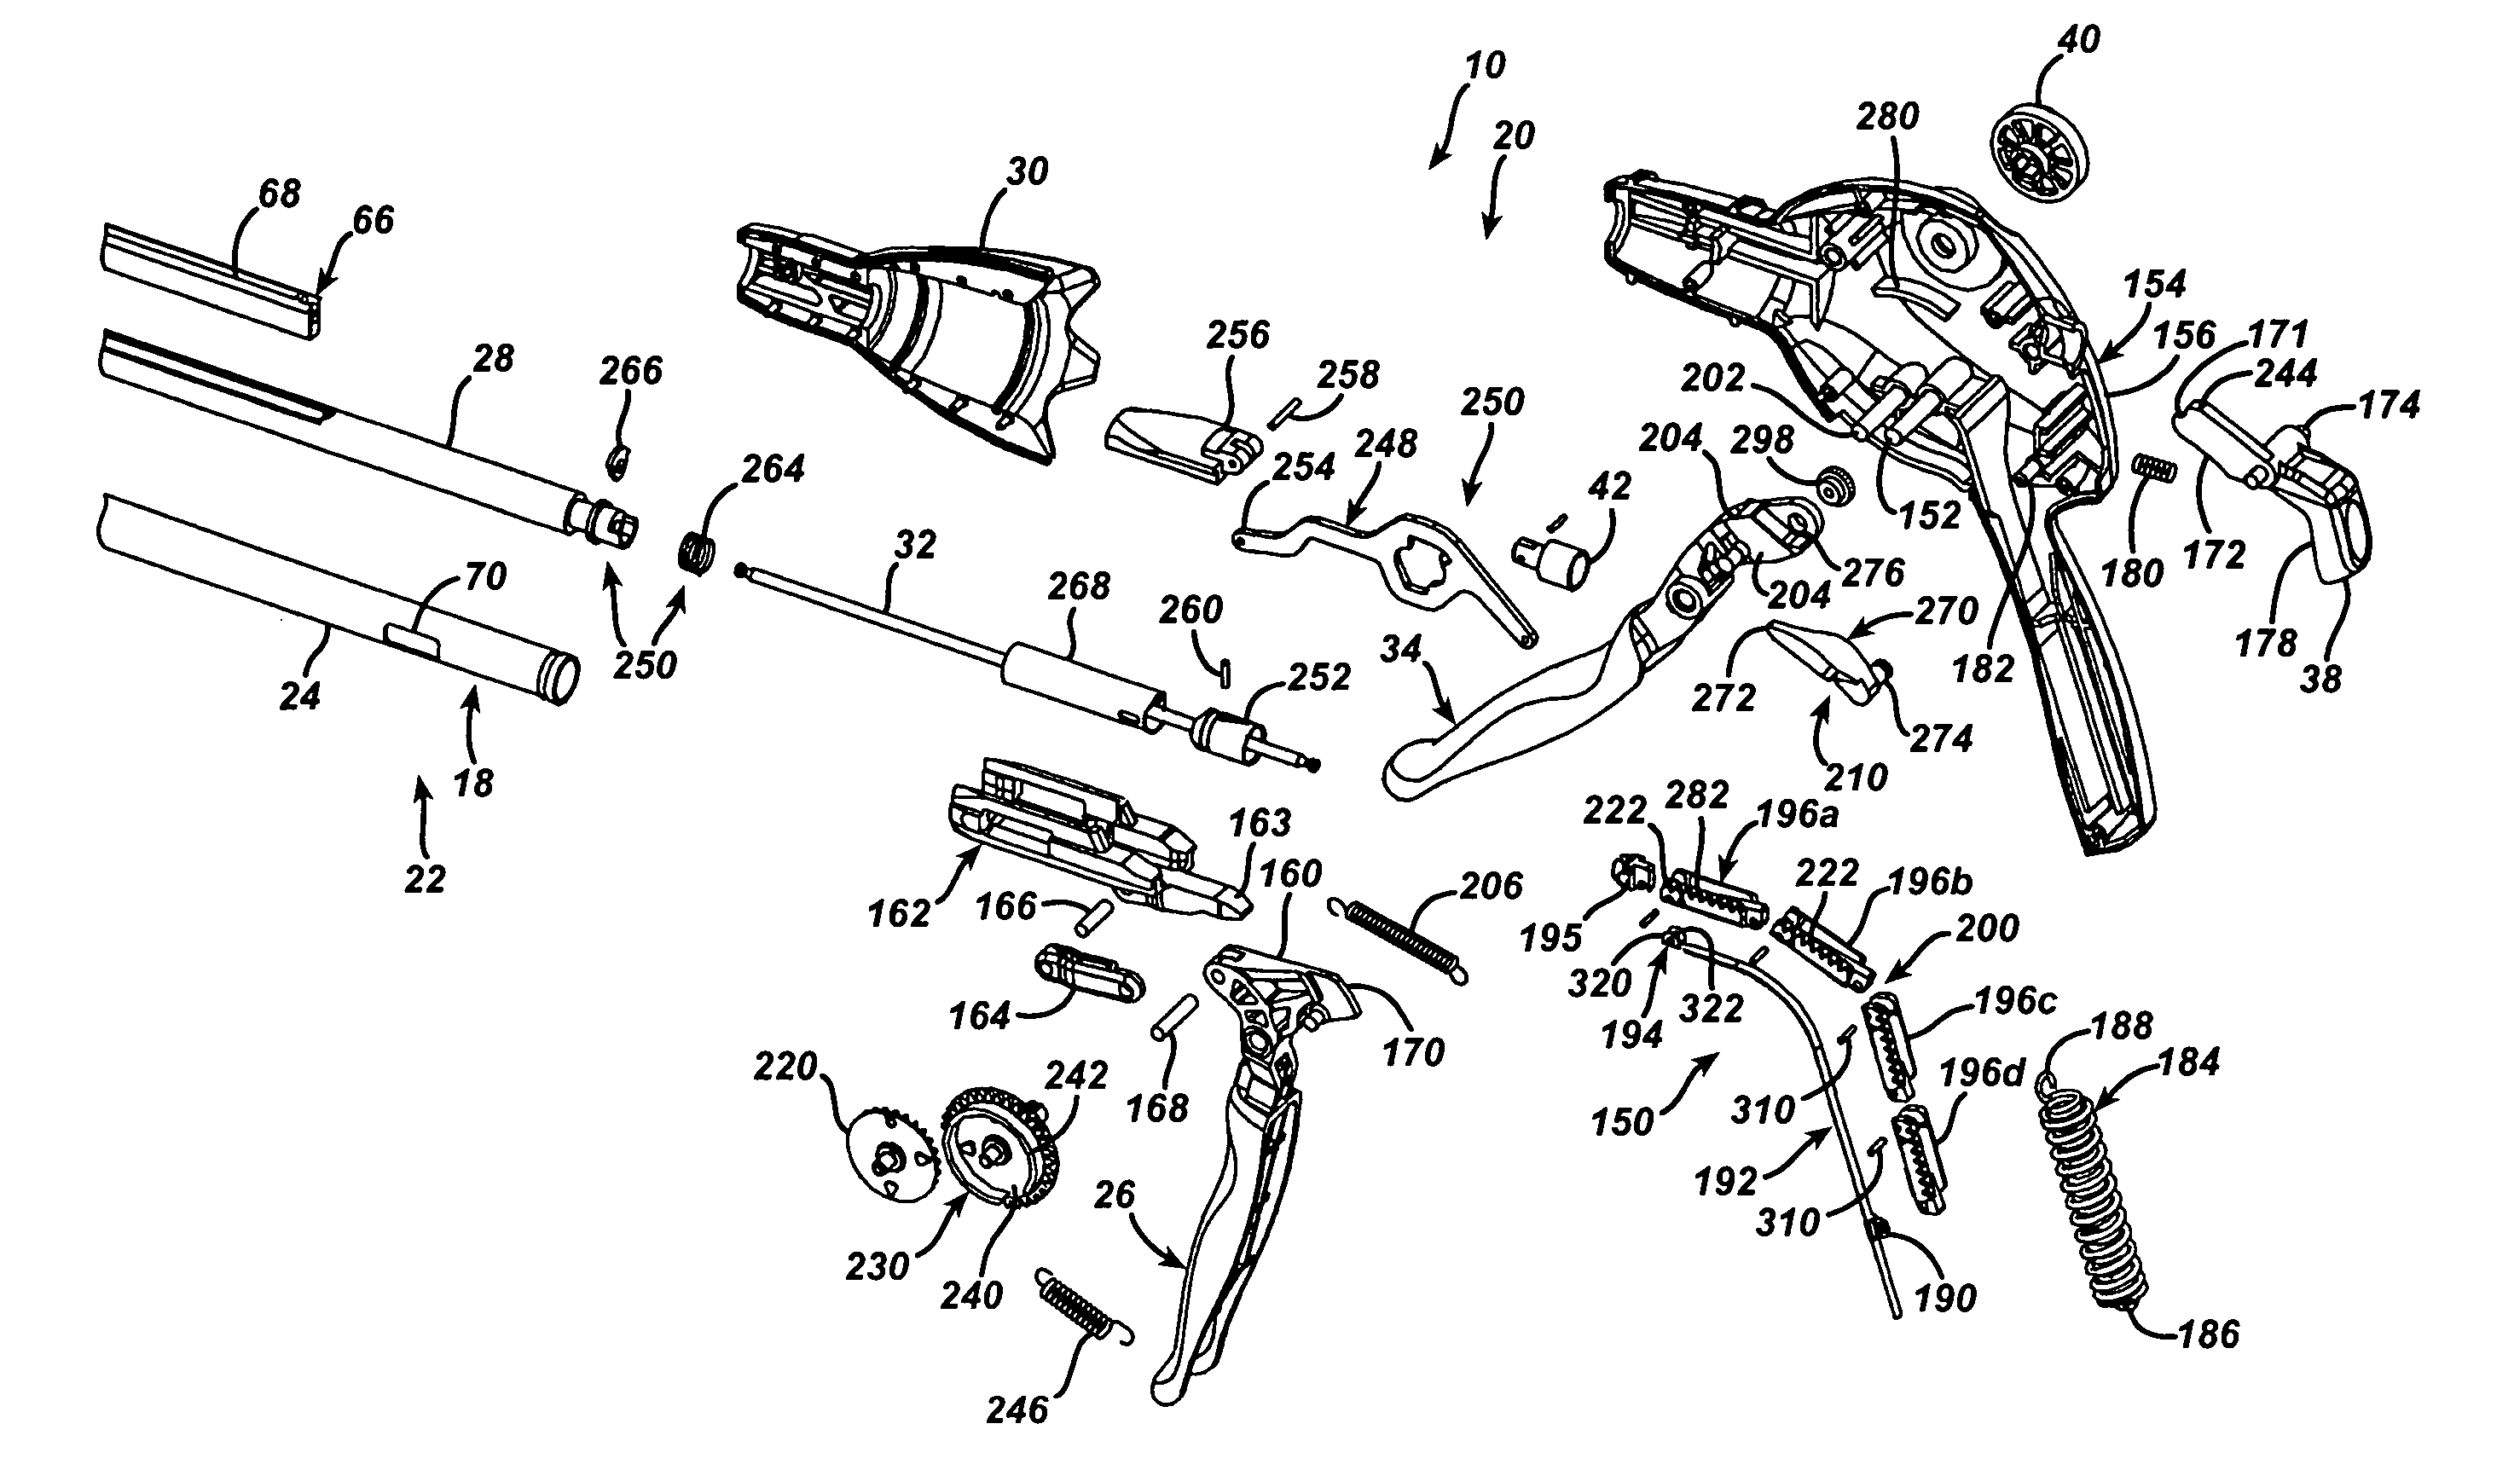 Surgical stapling instrument having multistroke firing incorporating a traction-biased ratcheting mechanism